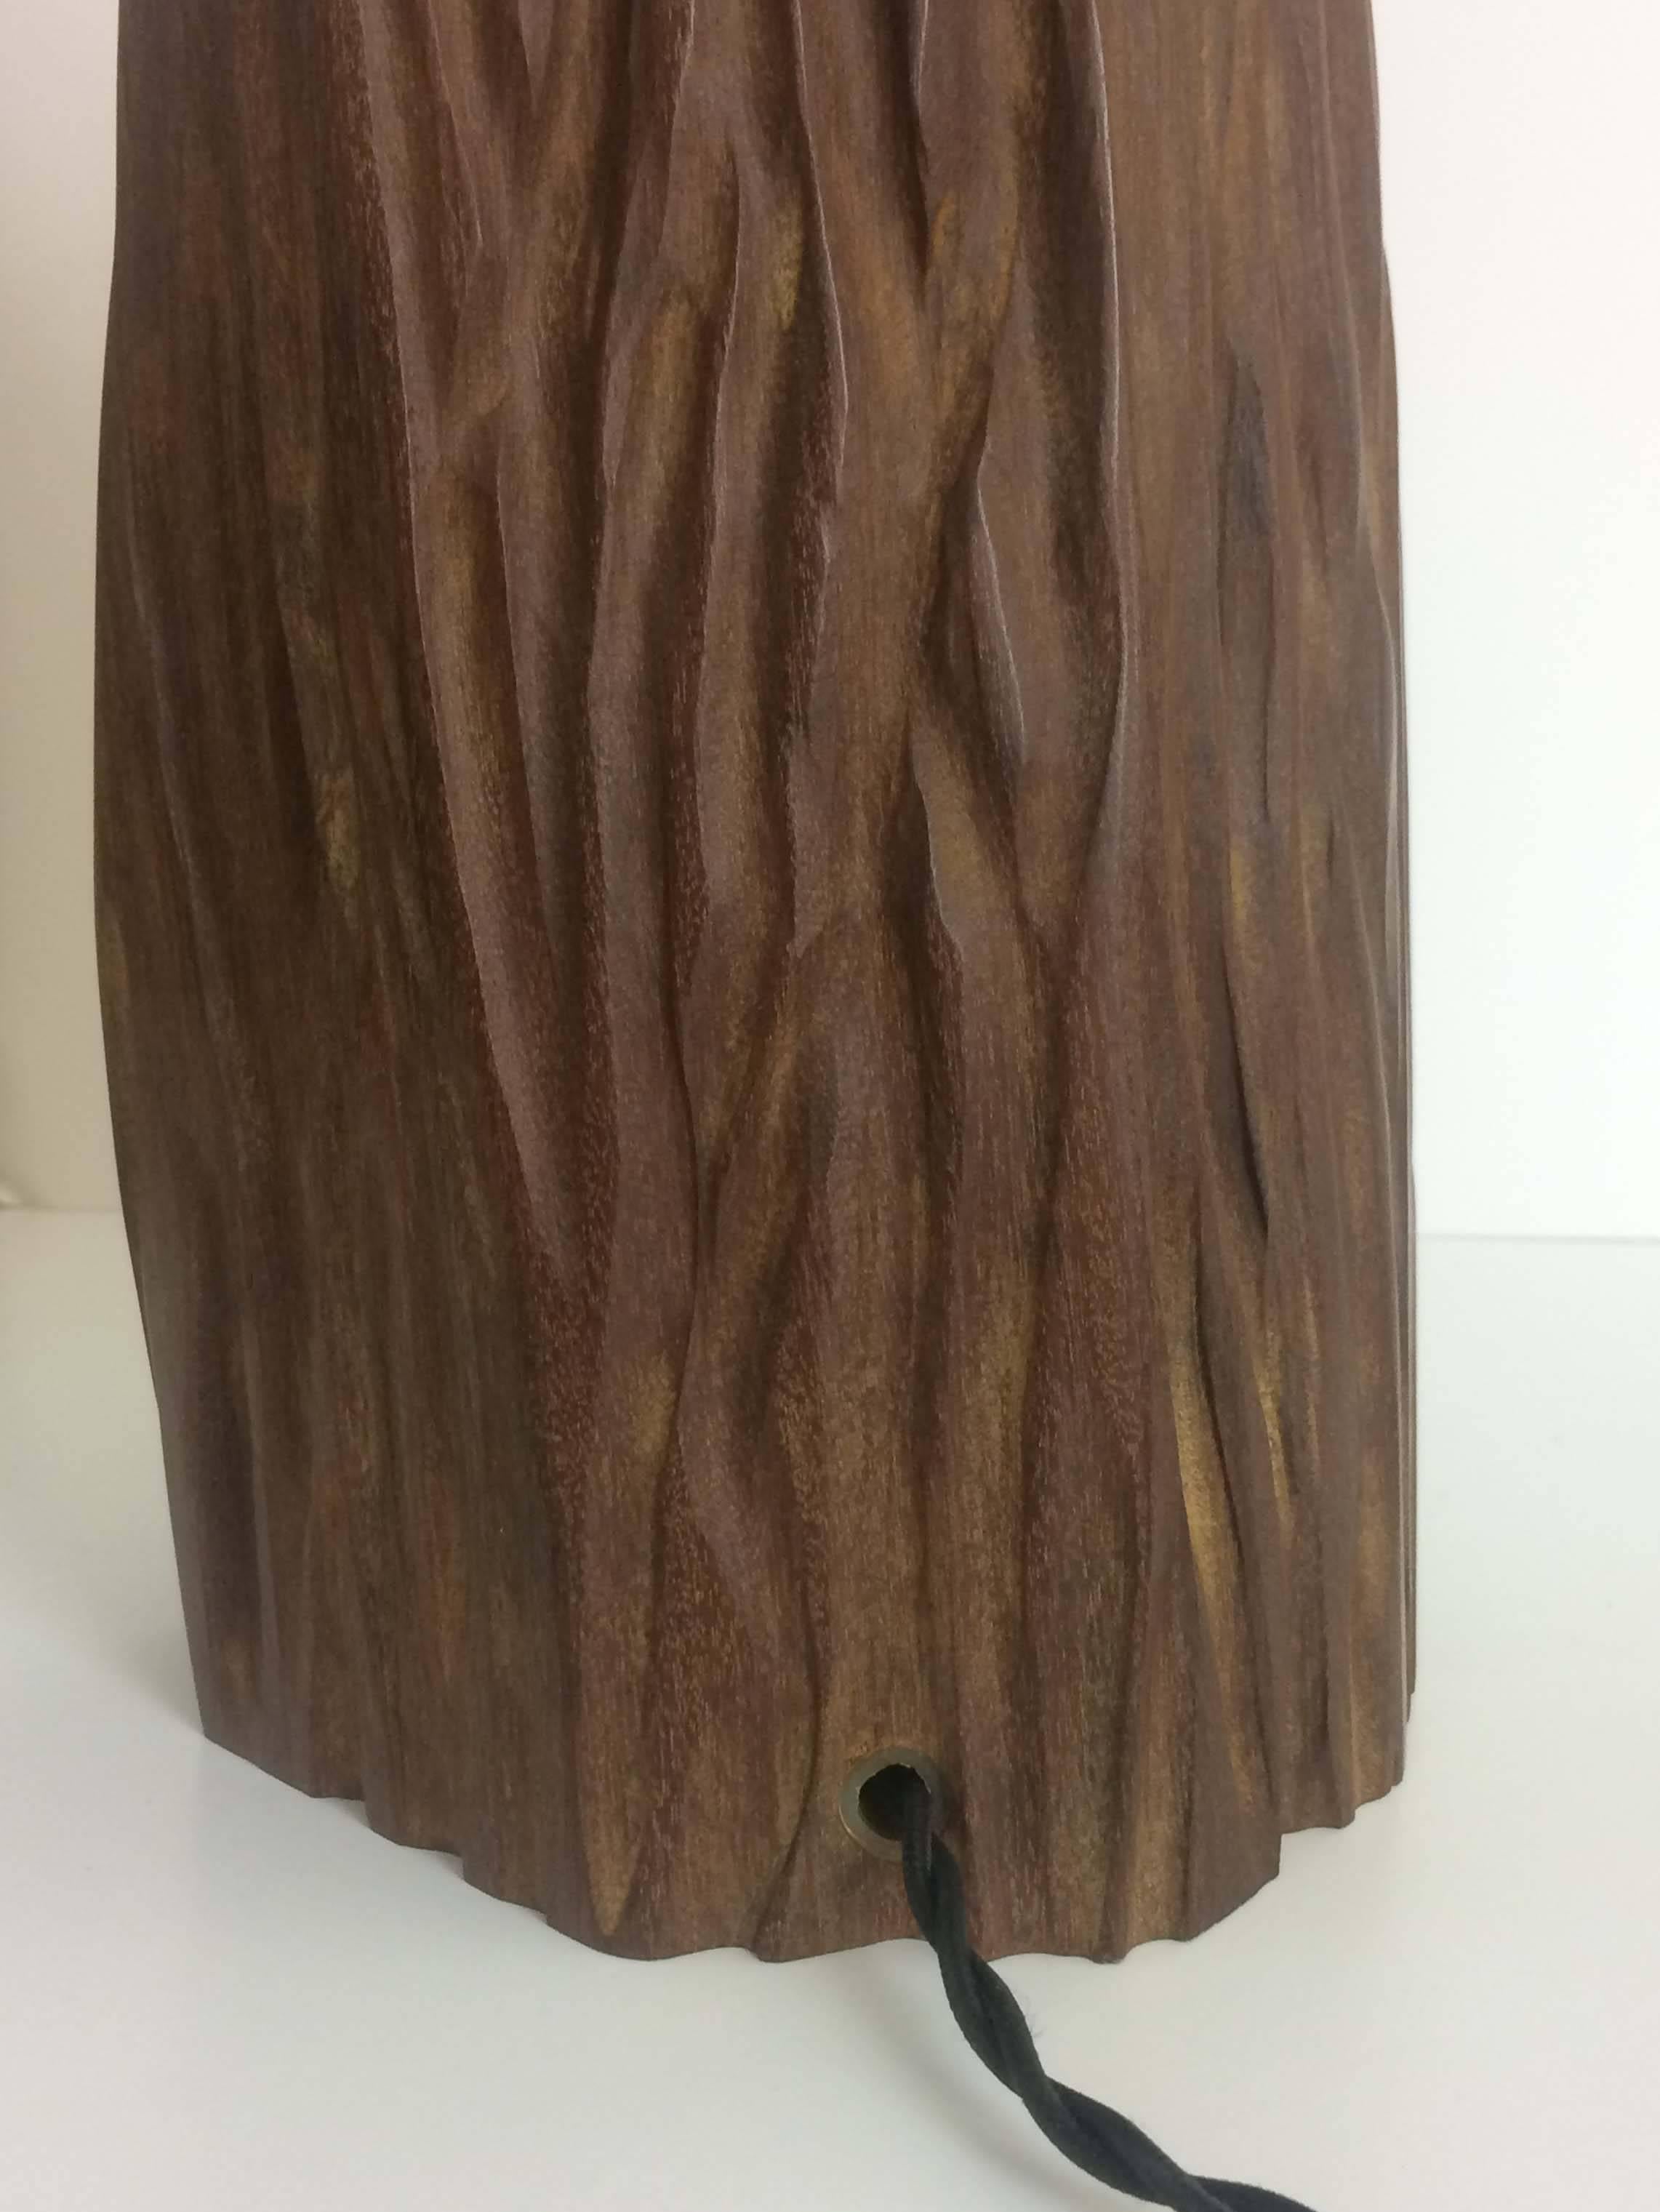 Organic Modern Hand-Sculpted Tabebuia Table Lamp, Unique Signed by Julien Barrault